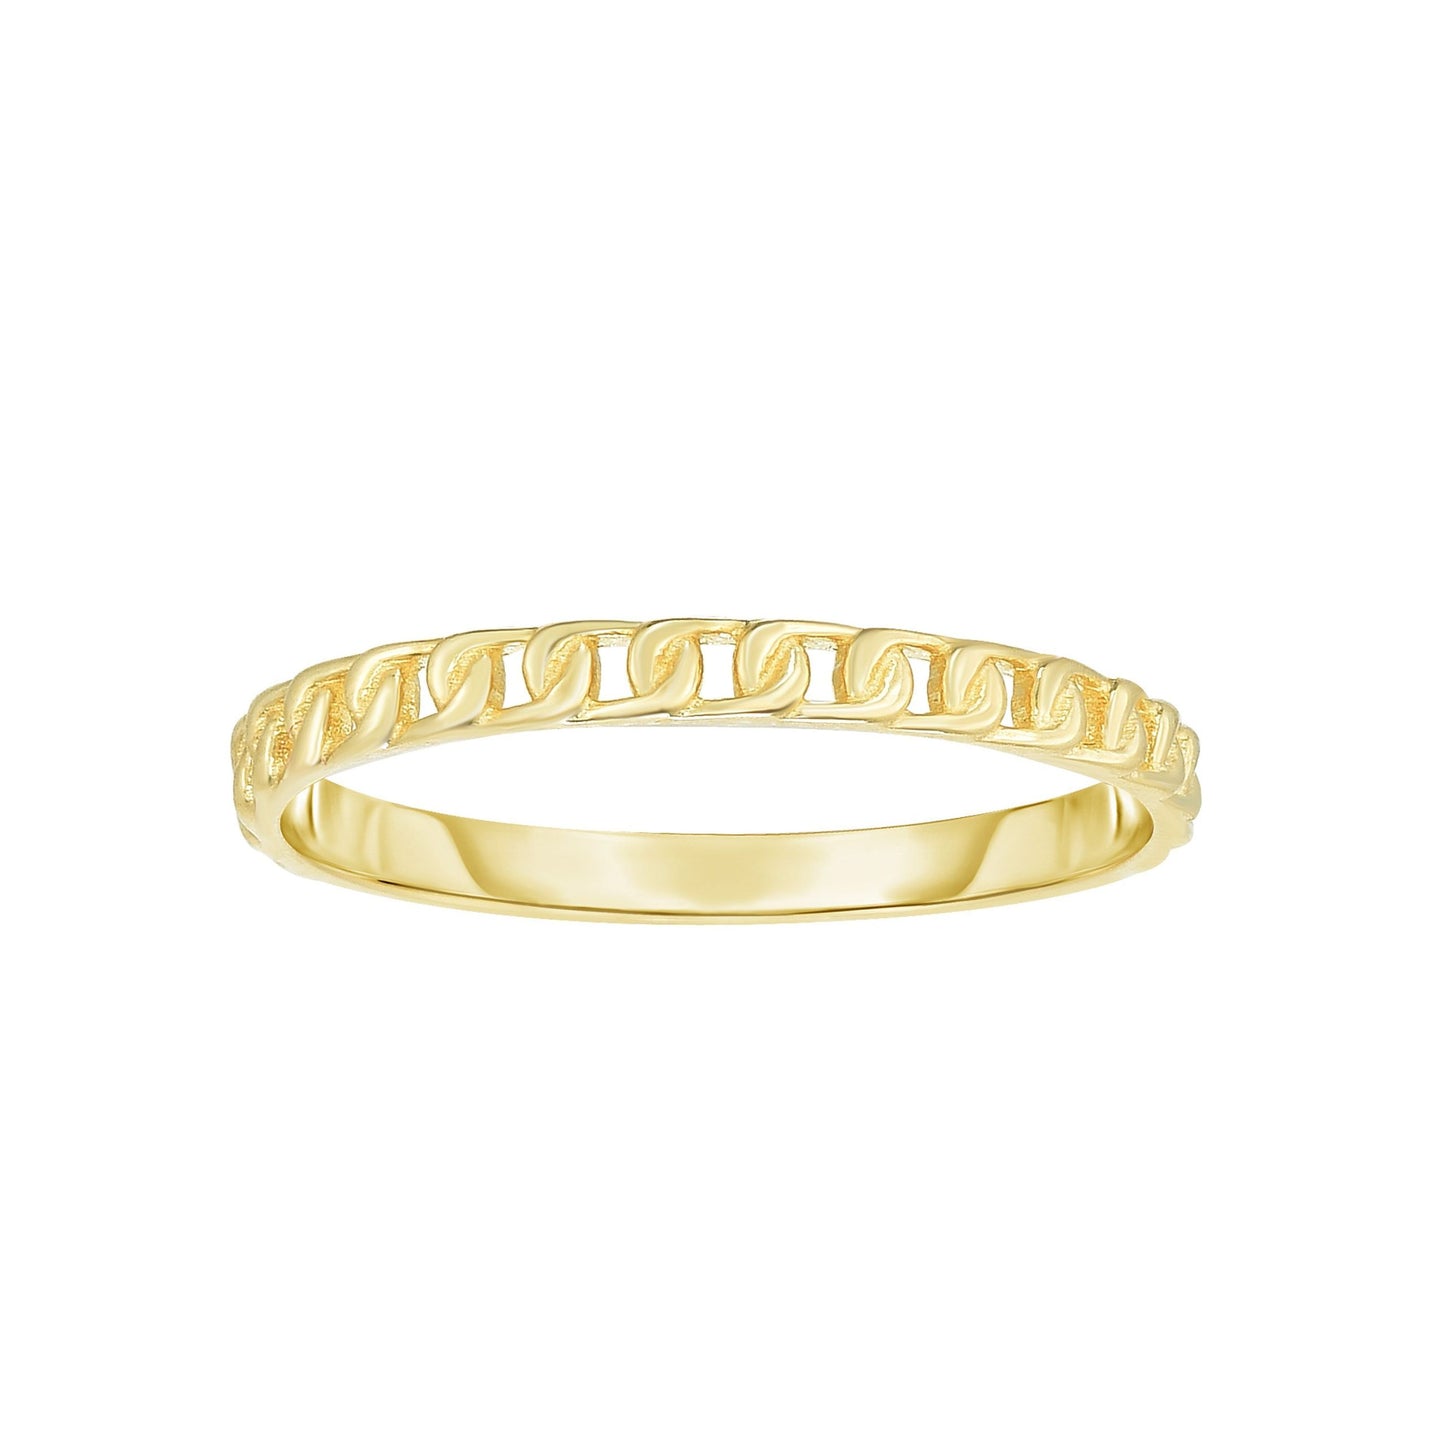 Bead Ring in 14k Yellow Gold